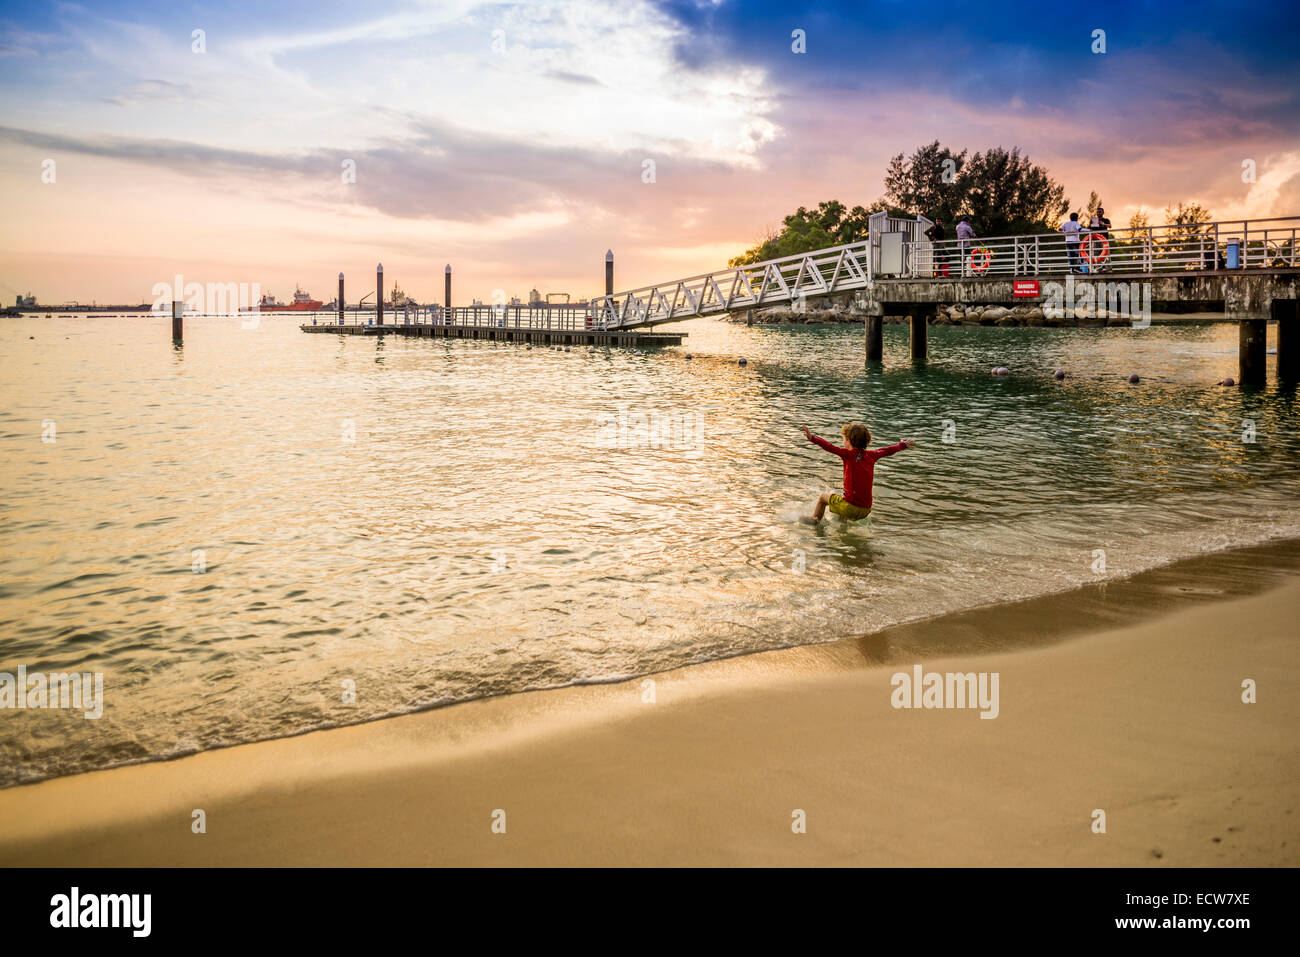 Kid jumping into the sea at Sentosa on a colorful evening sunset. Stock Photo